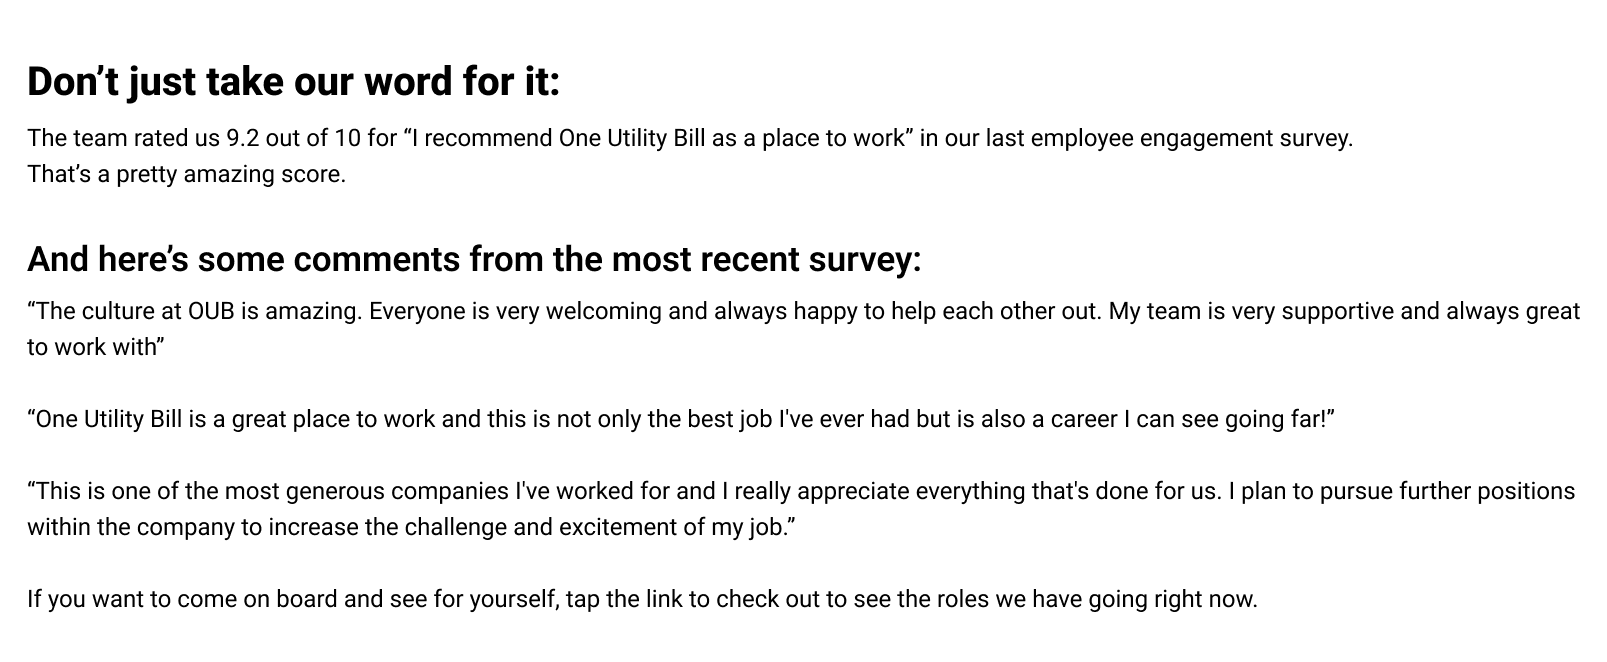 One utility bill survey comments 